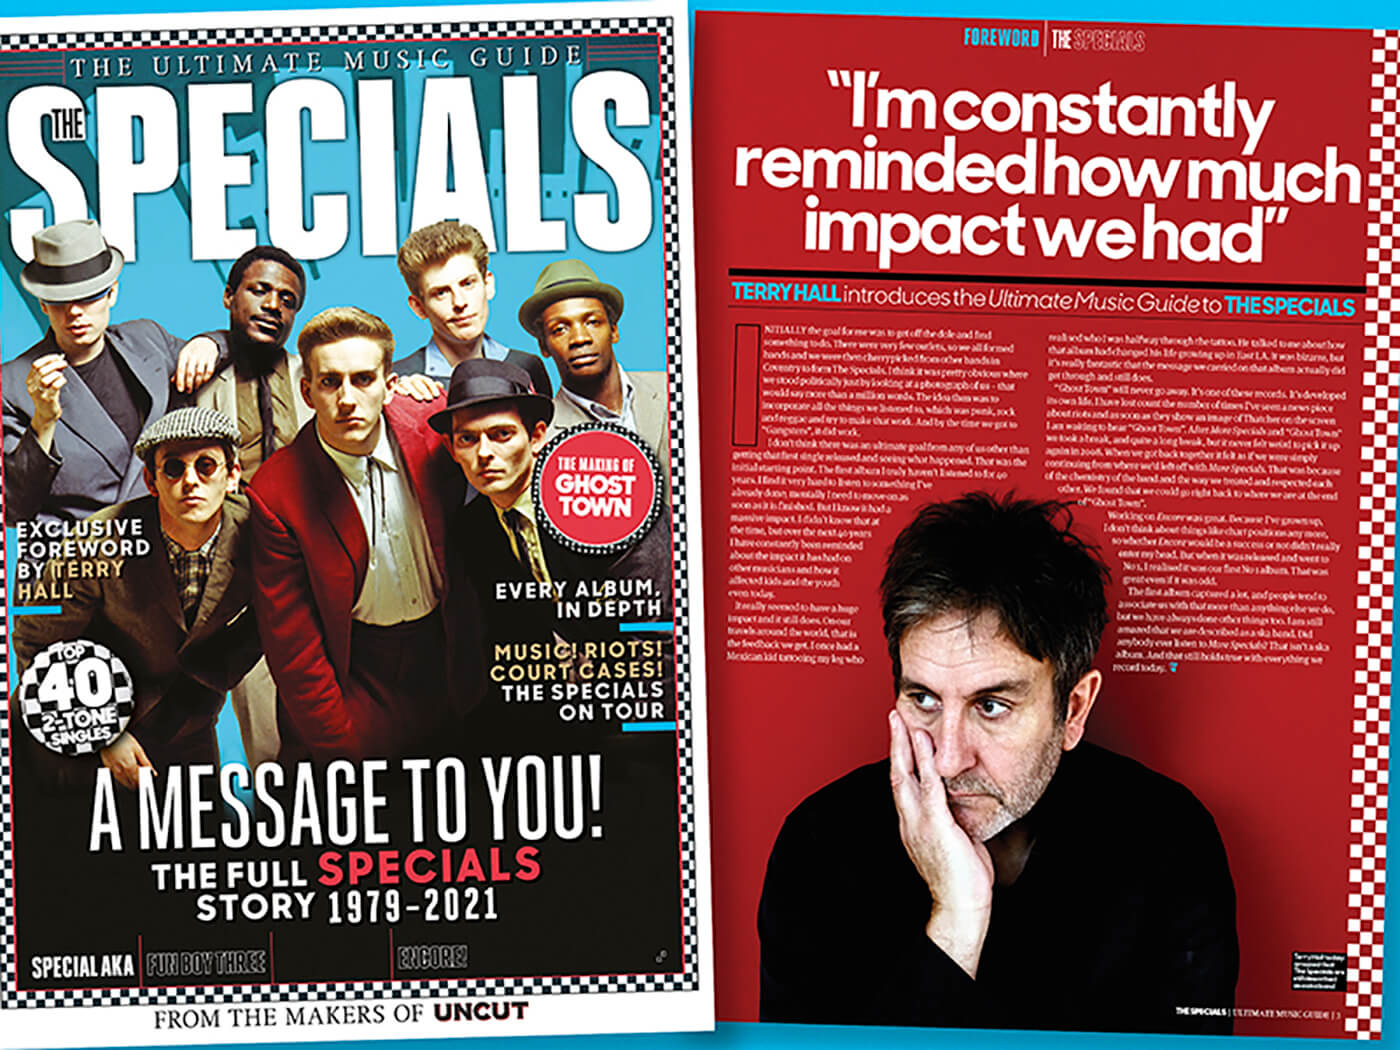 Introducing the Ultimate Music Guide to The Specials - UNCUT